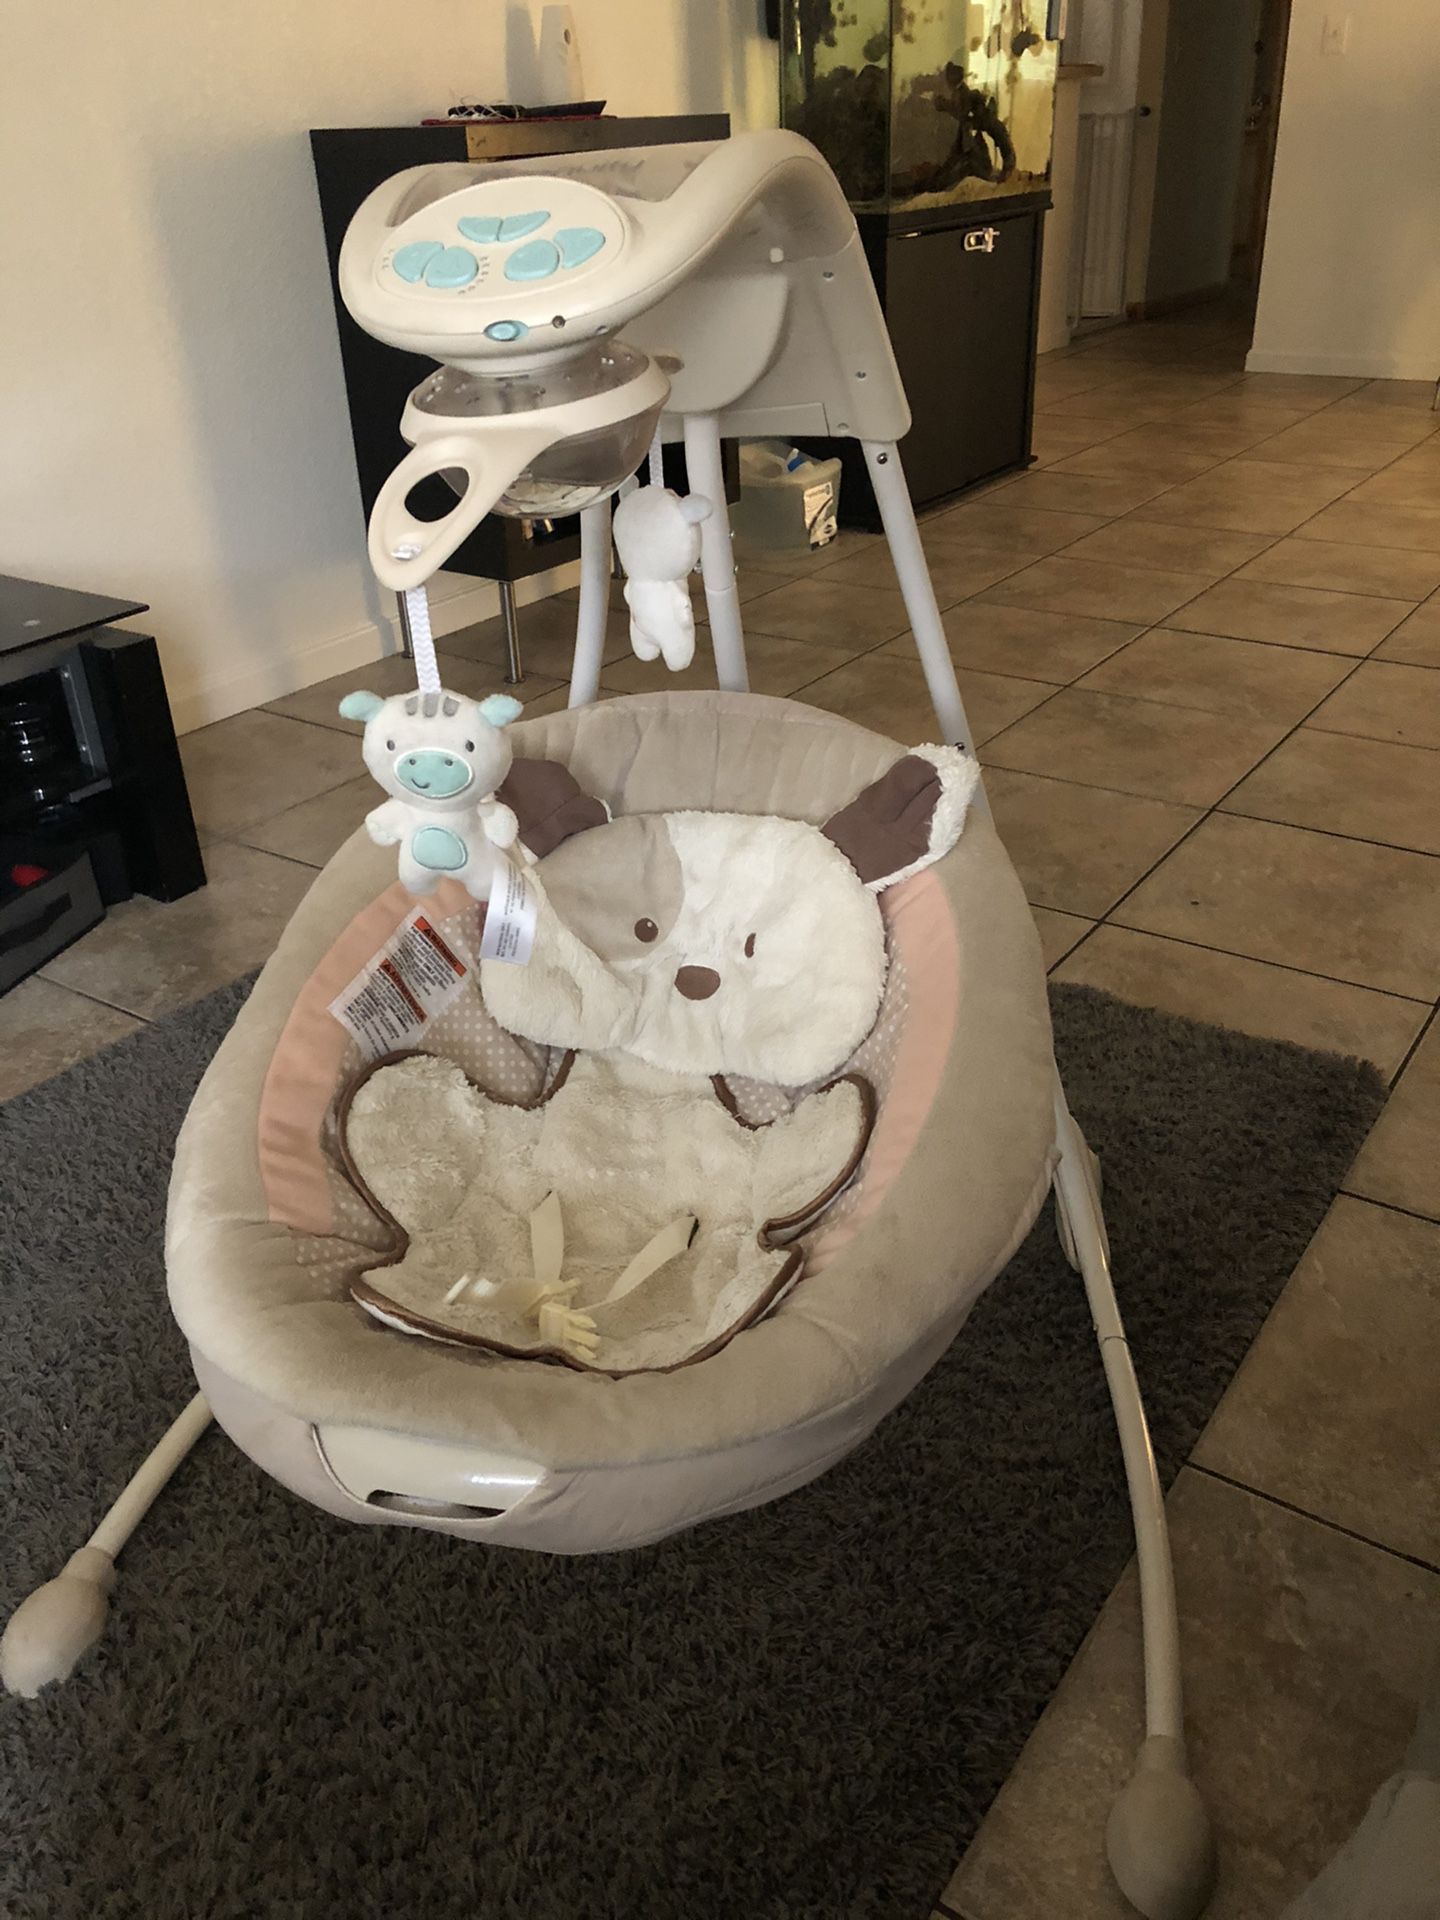 Ingenuity baby swing for sale without charger